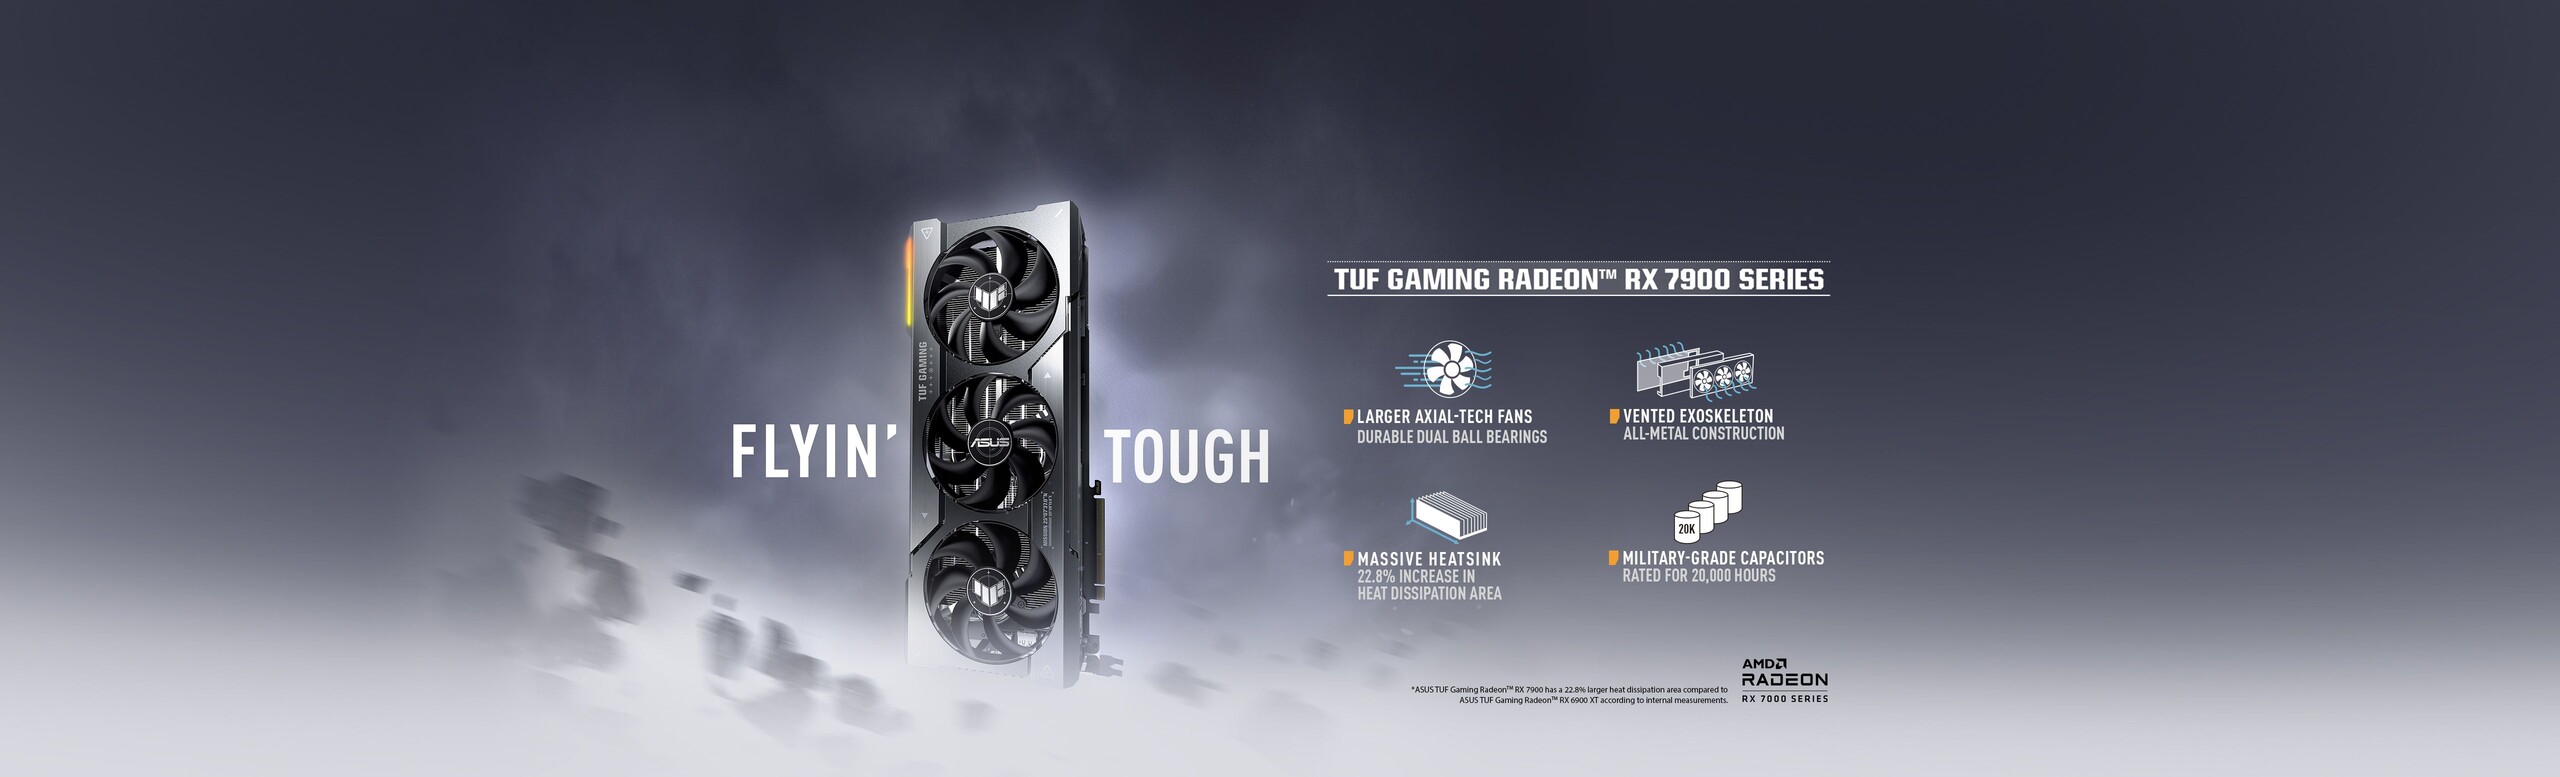 Image of TUF Gaming Radeon RX 7900 Series Larger Axial-Tech Fans icon, Vented Exoskeleton icon, Massive Heatsink icon, Military-Grade Capacitors Rated for 20K Hours